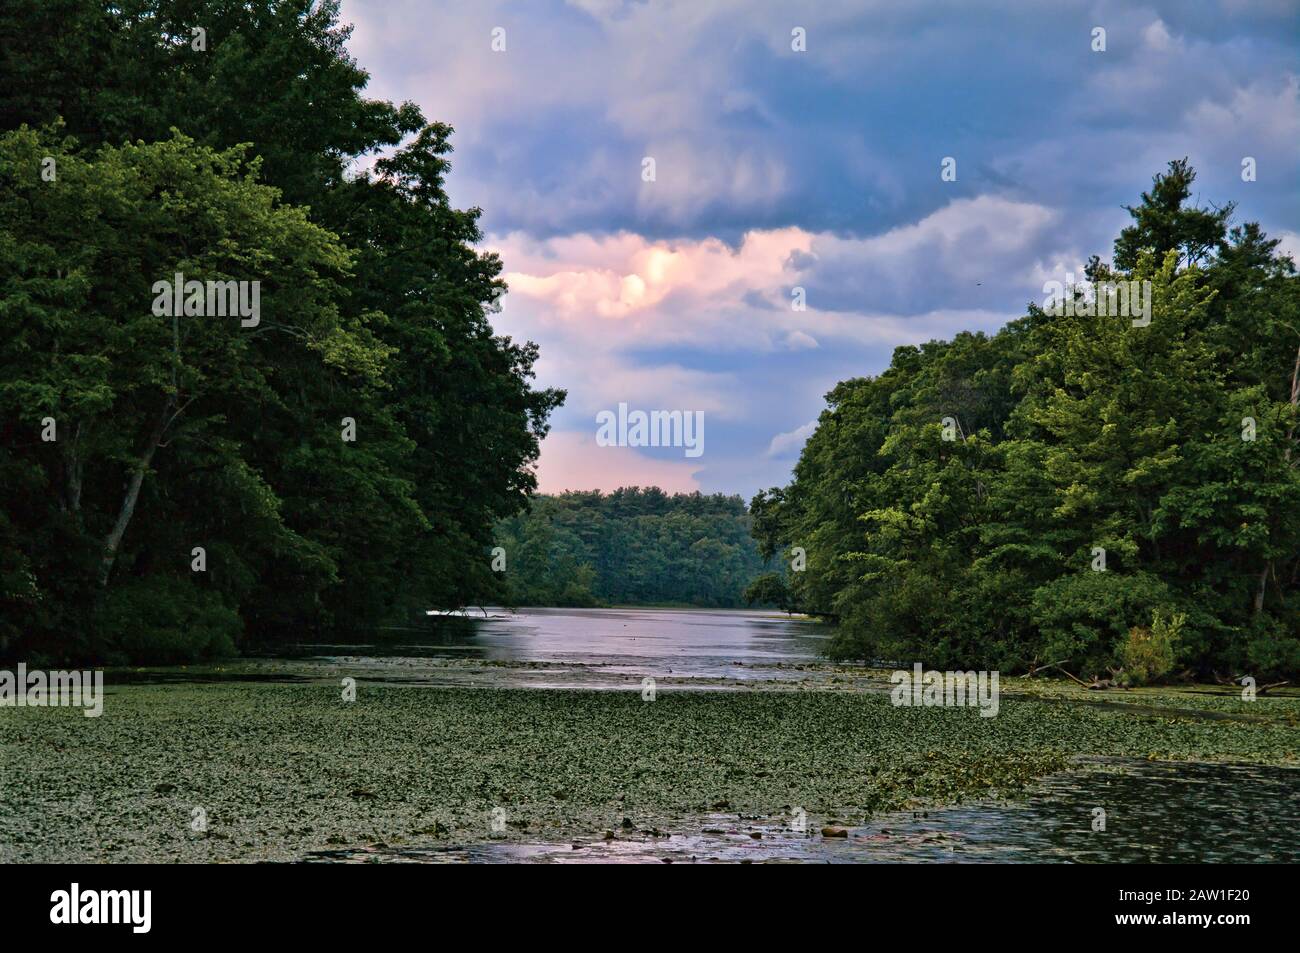 Lake in the forest landscape Stock Photo